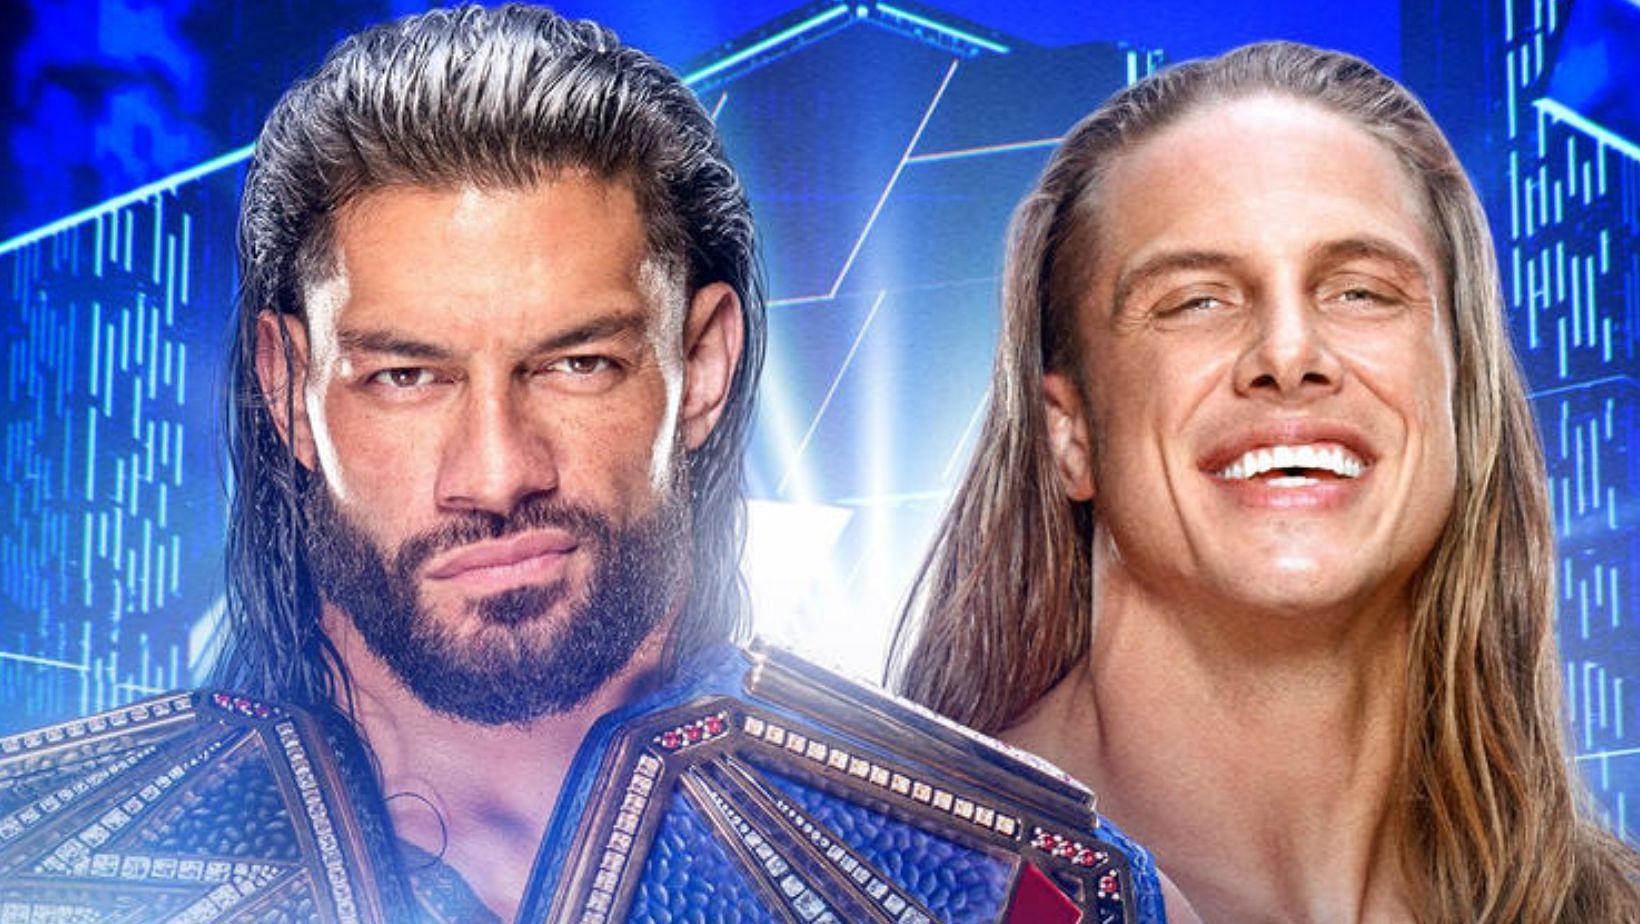 Roman Reigns will defend the Undisputed WWE Universal Championship on SmackDown